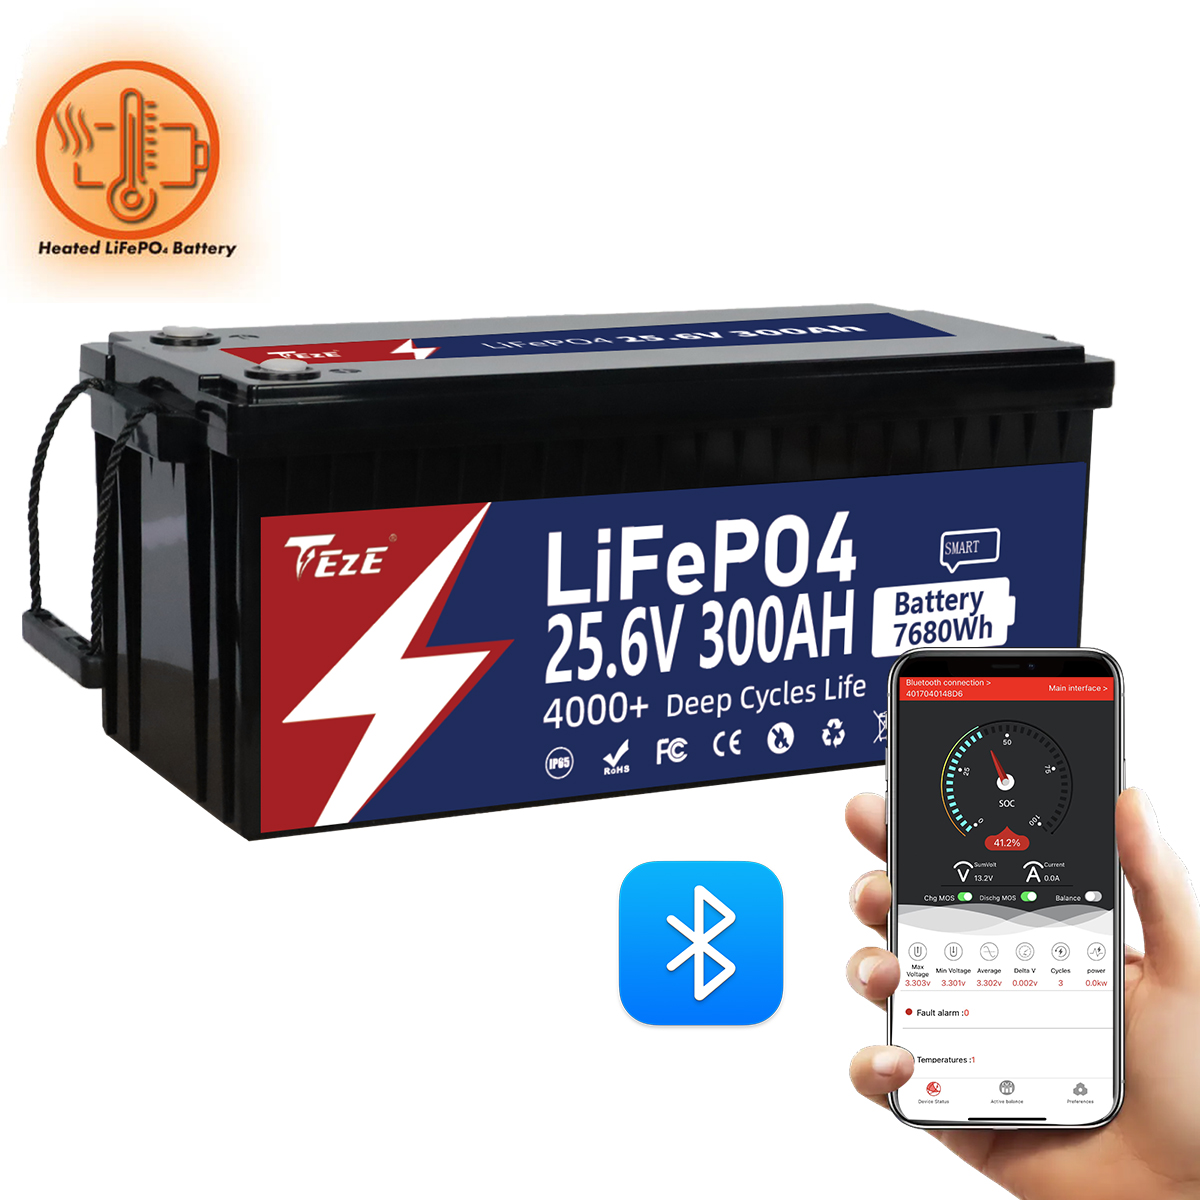 TezePower 25.6V 300Ah LiFePO4 Battery with Bluetooth, Self-heating and Active Balancer, Built-in 200A Daly BMS(Bluetooth Built-in Version)